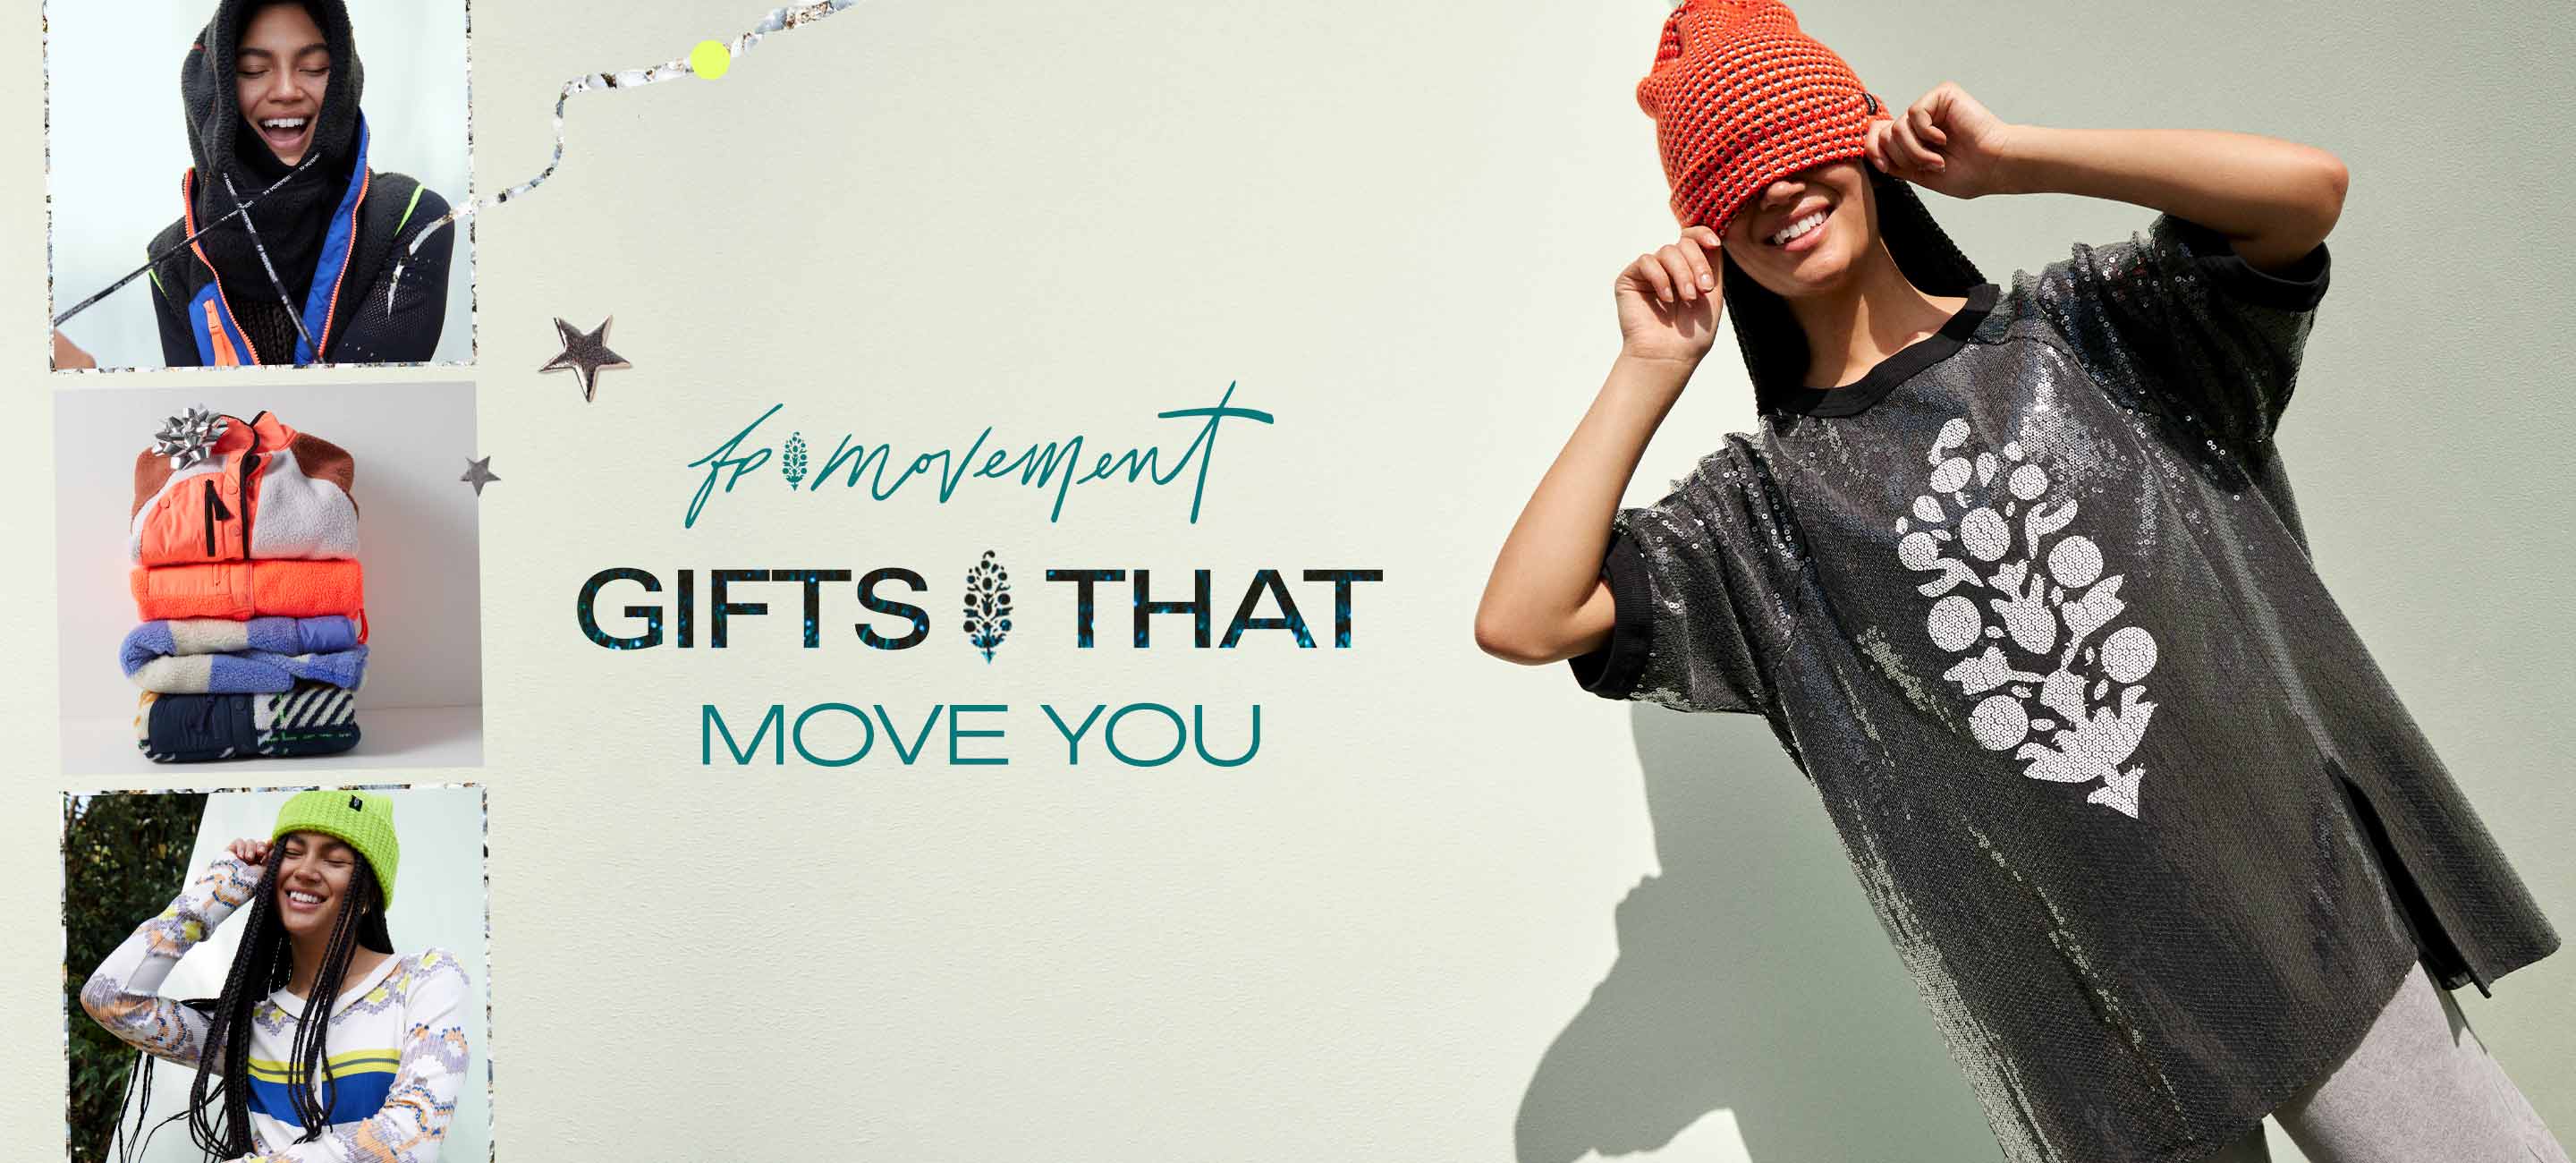 Free People Stretches Retail Footprint With Stand-alone FP Movement Stores